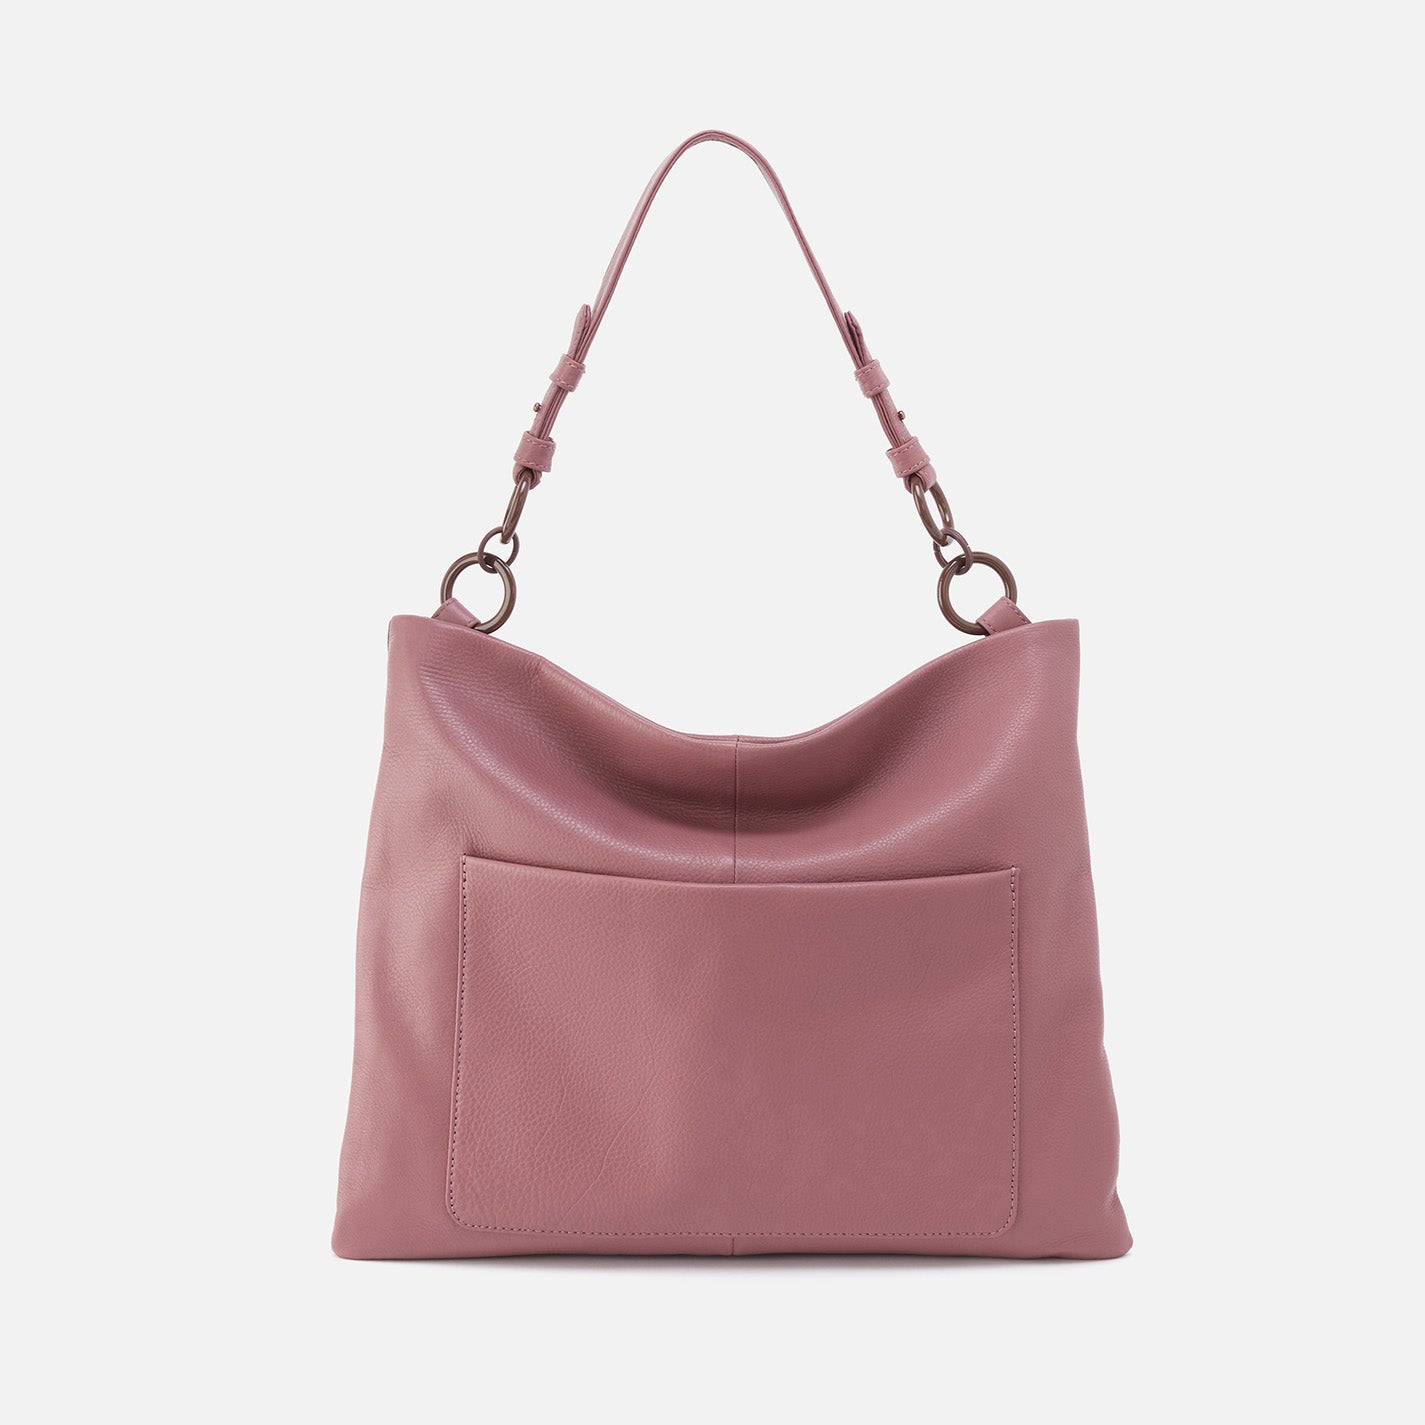 9 Best Hobo Bags and Purses for 2018 - Chic Leather Hobo Handbags